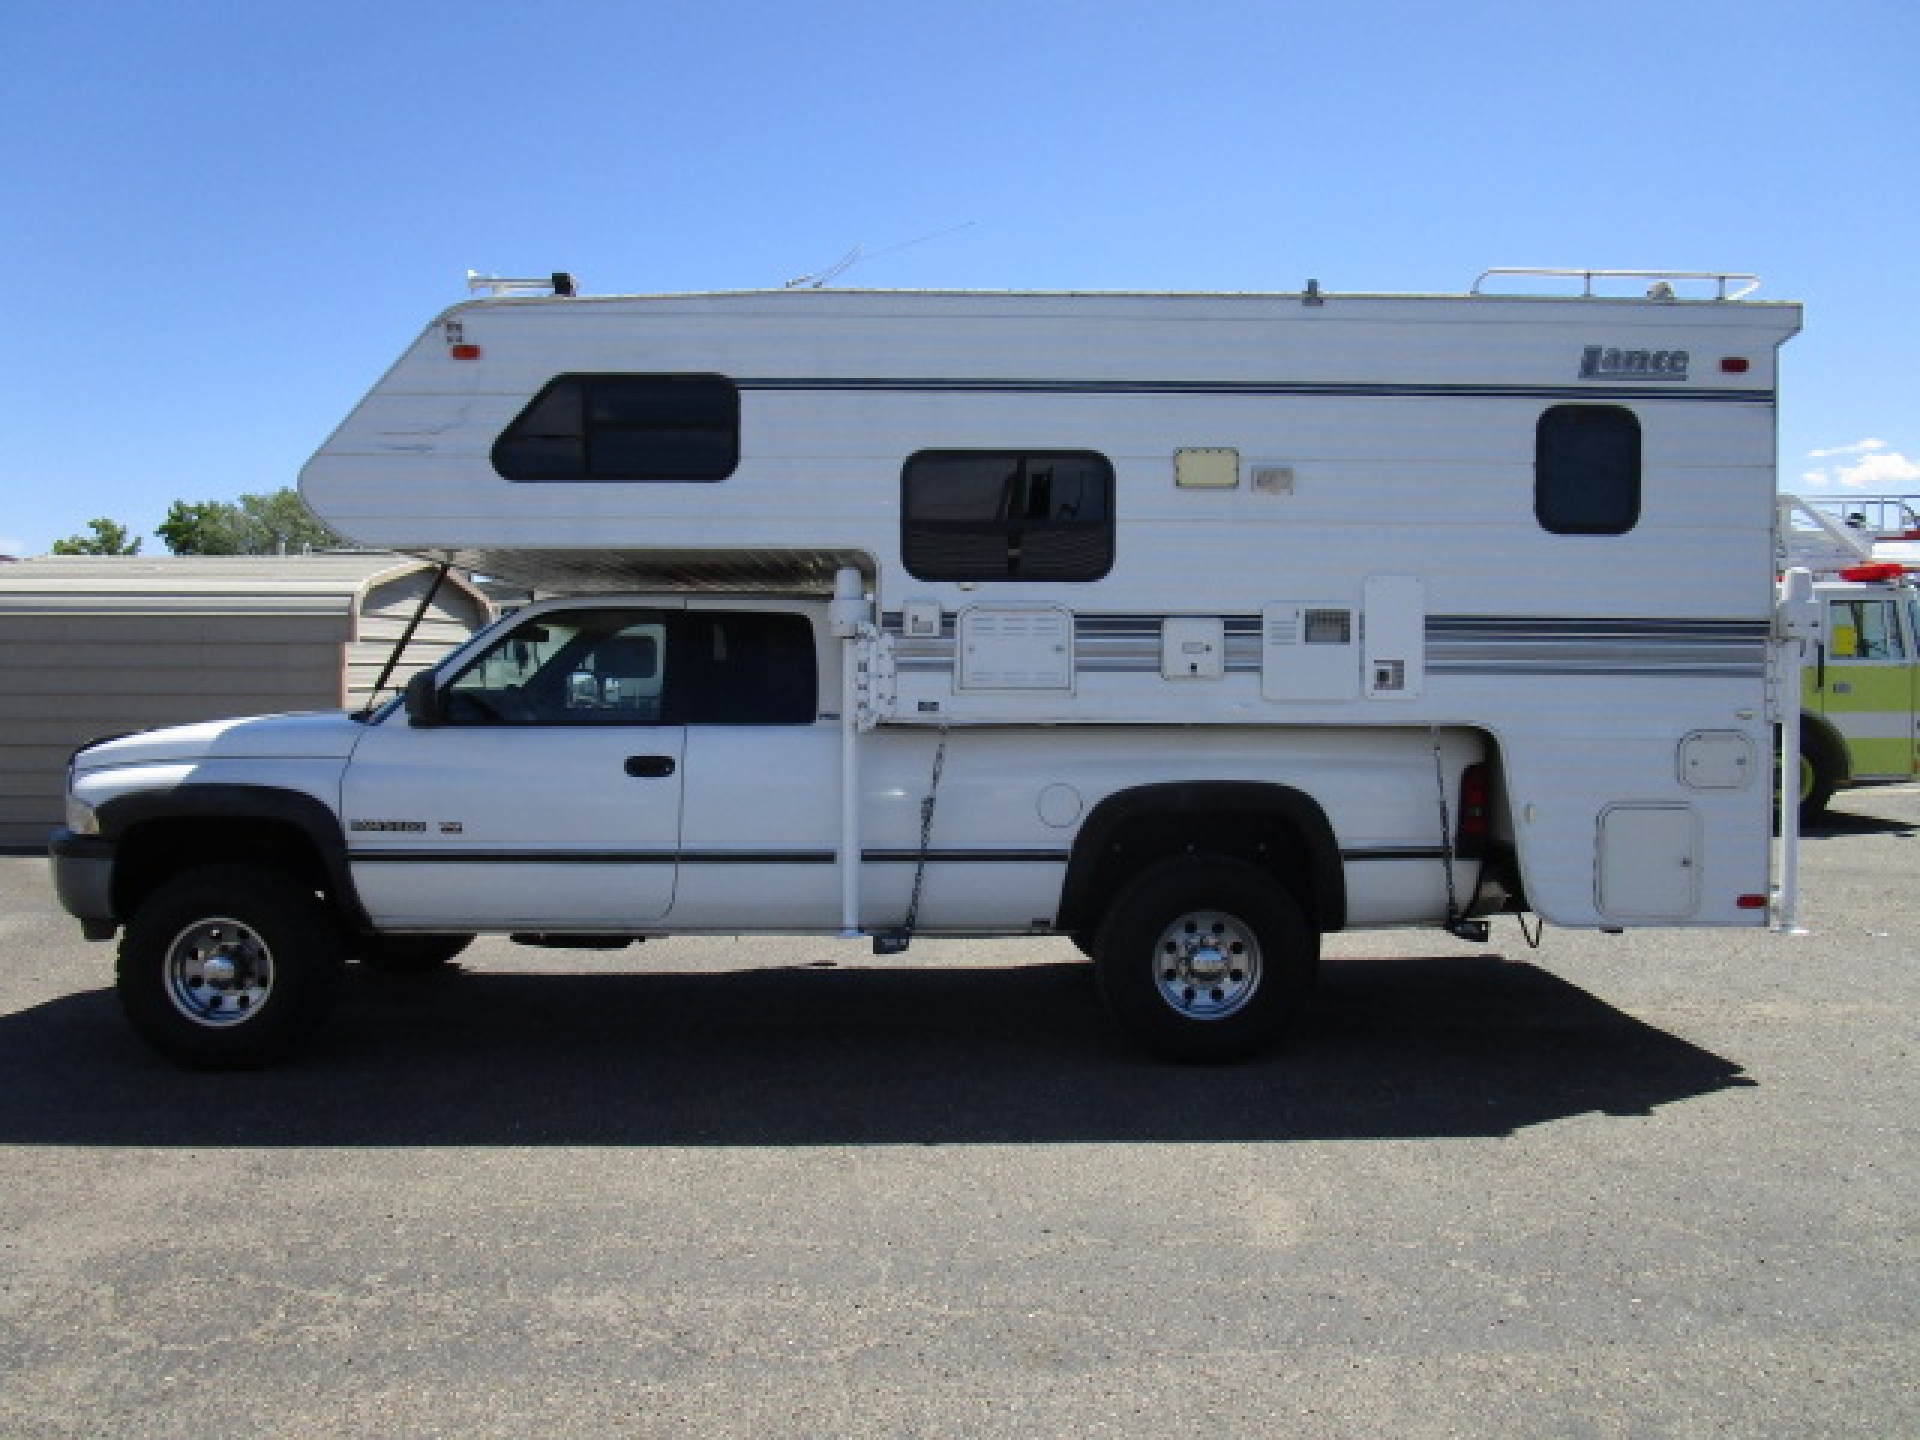 2000 Dodge 2500 4X4 Extended Cab Lance 1130 Camper Longbed